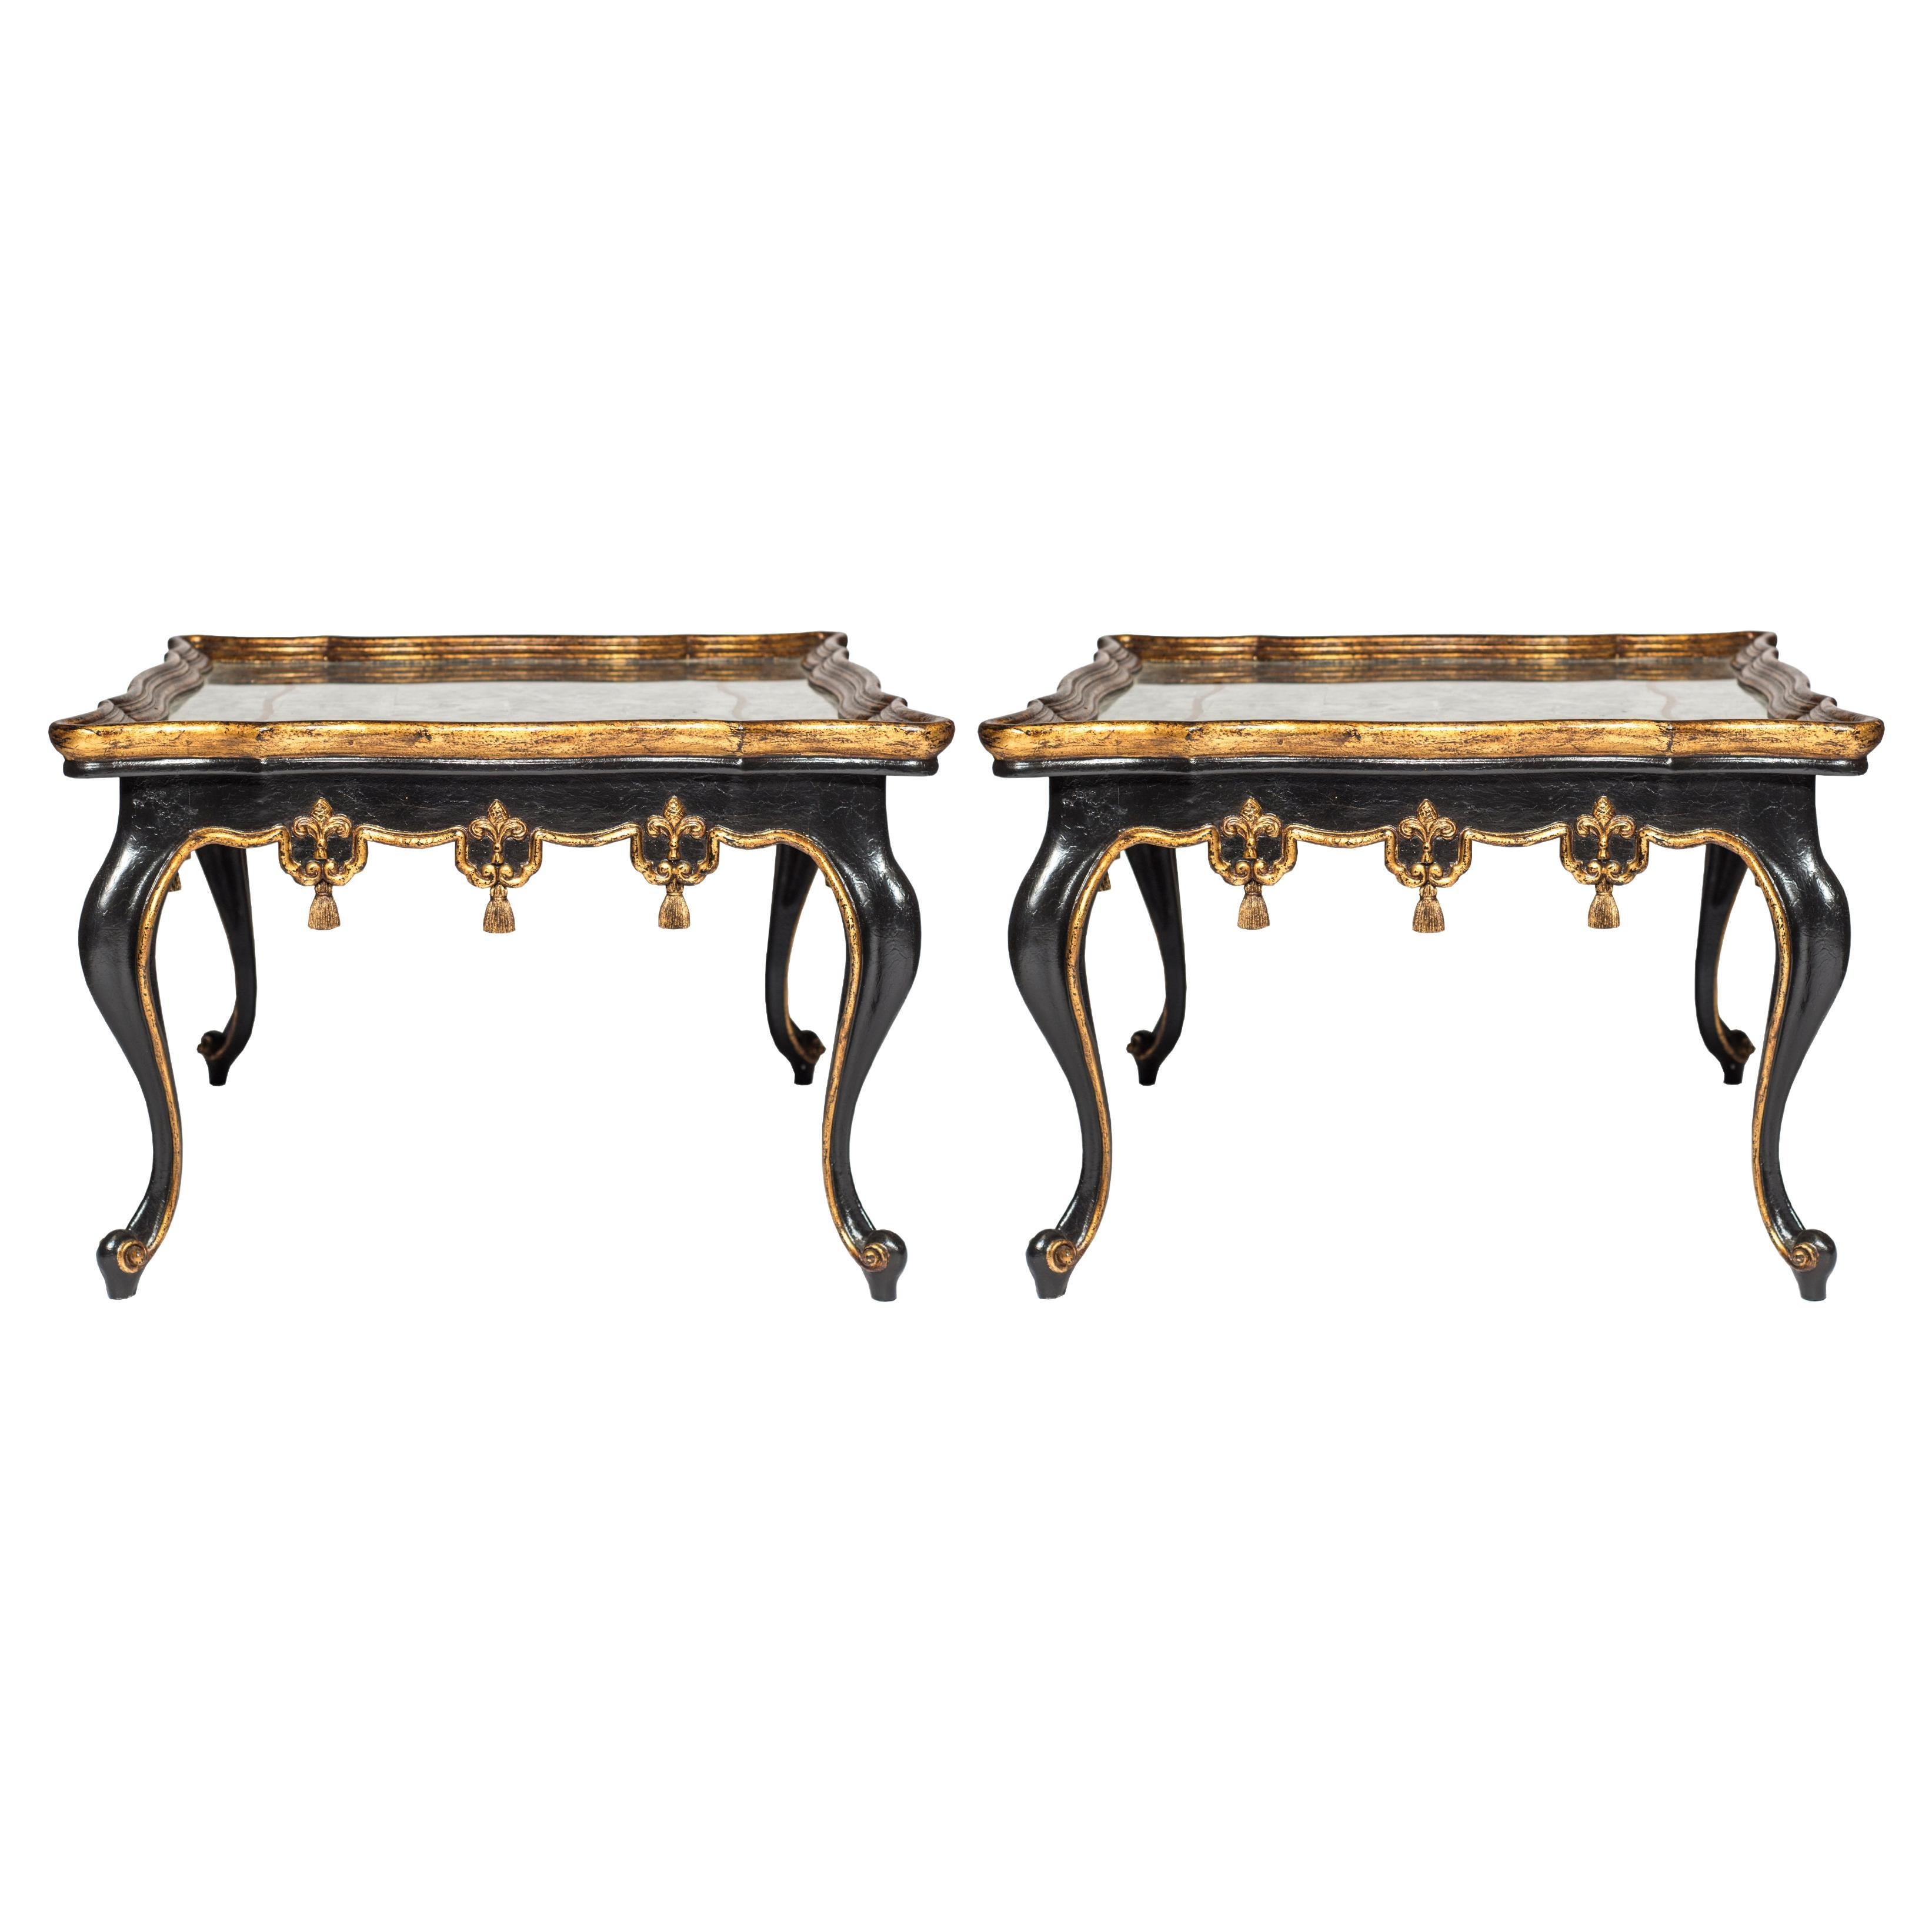 Pair of Mirrored Verre Eglomise Carved Side Tables with Gilding